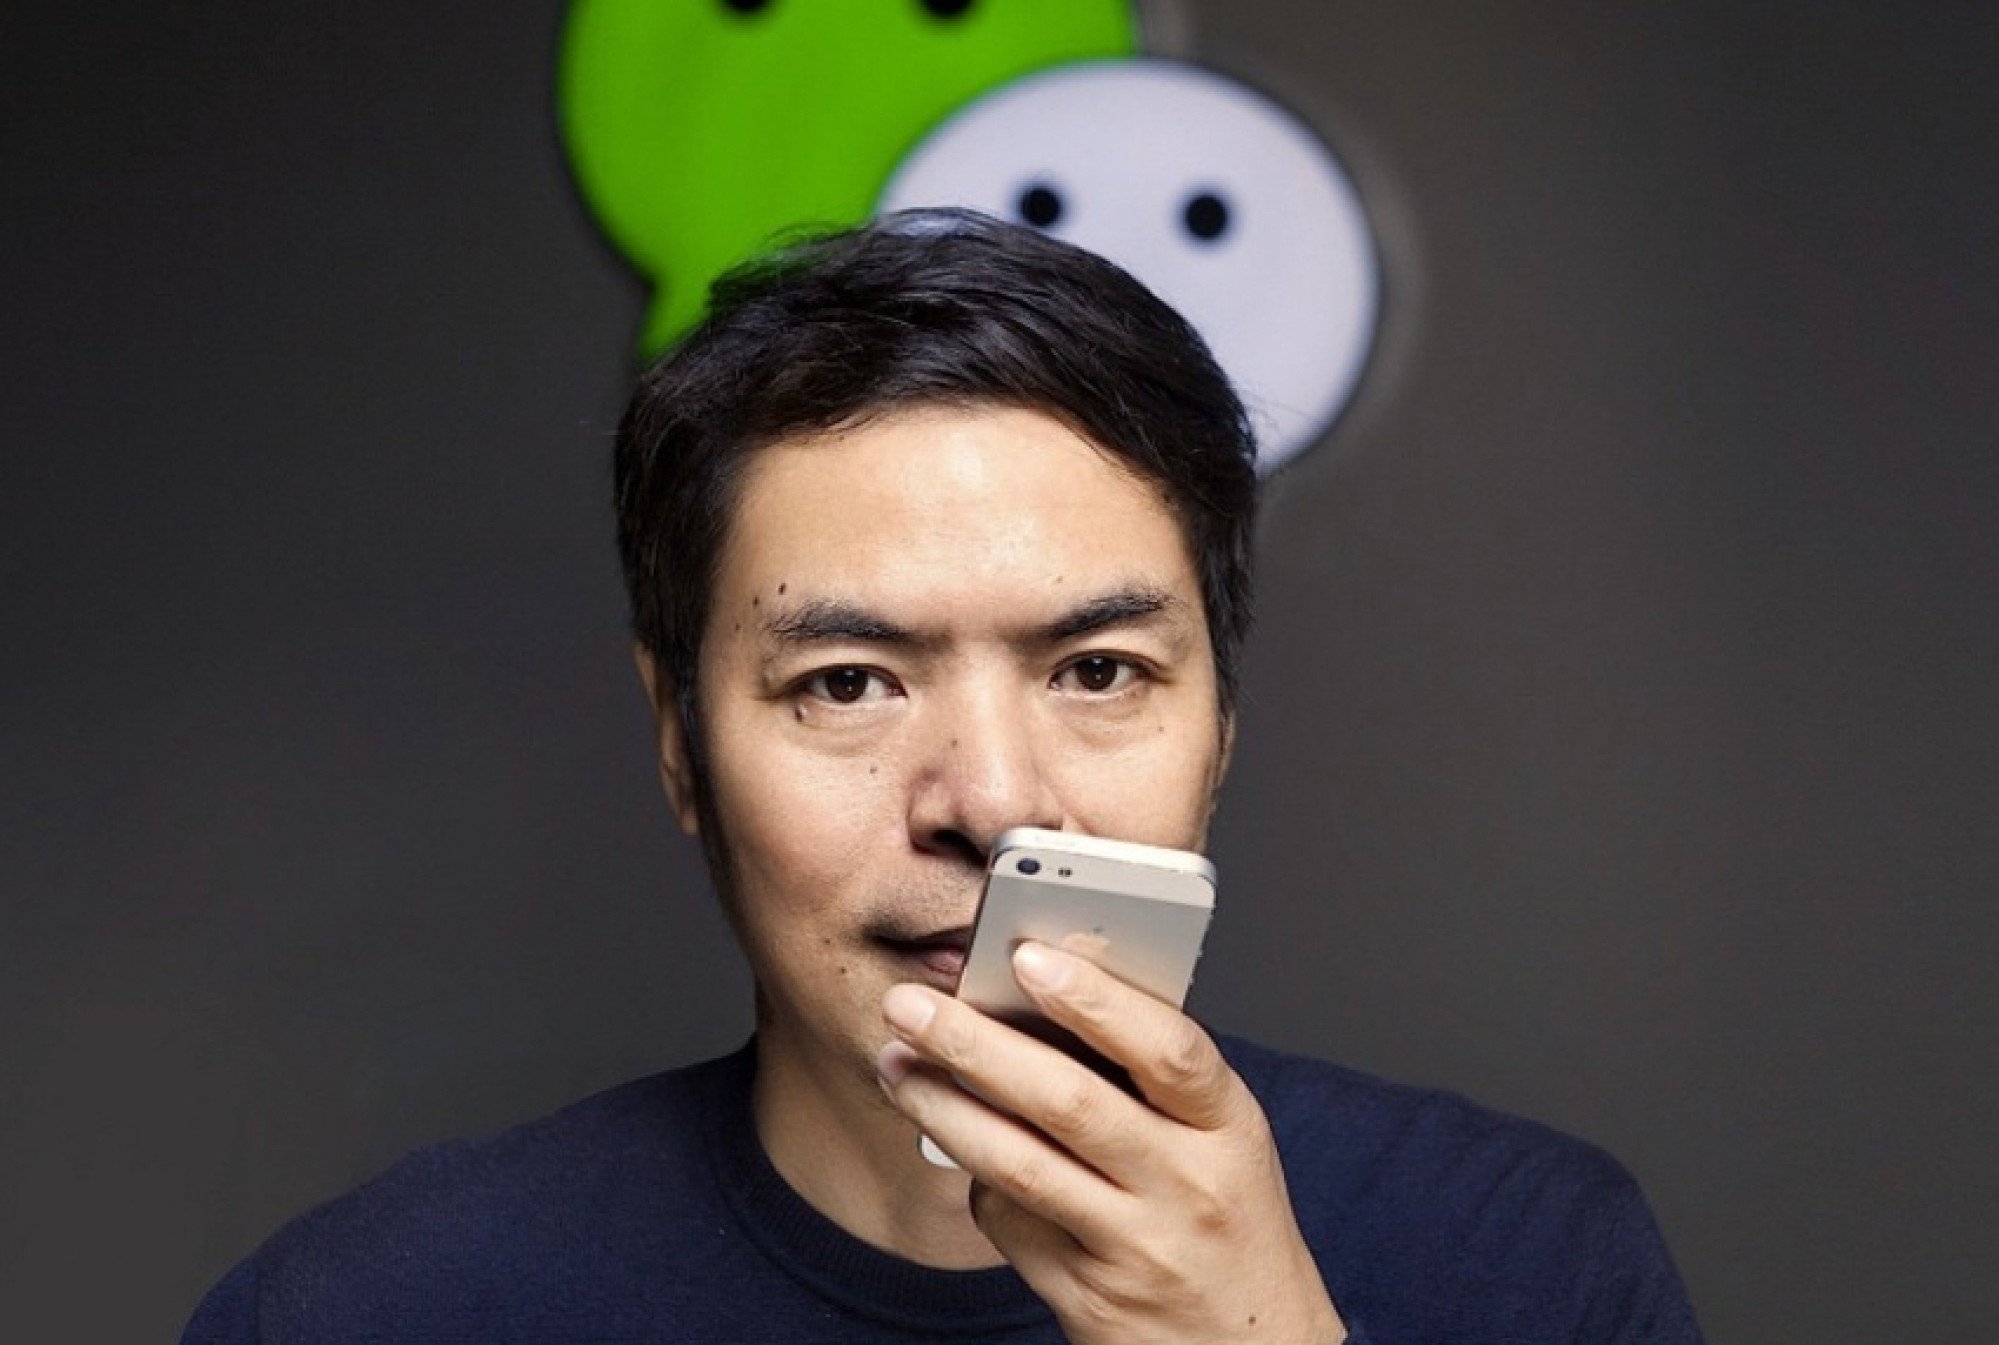 Zhang Xiaolong, also known as Allen Zhang, is known for creating WeChat. Photo: Handout